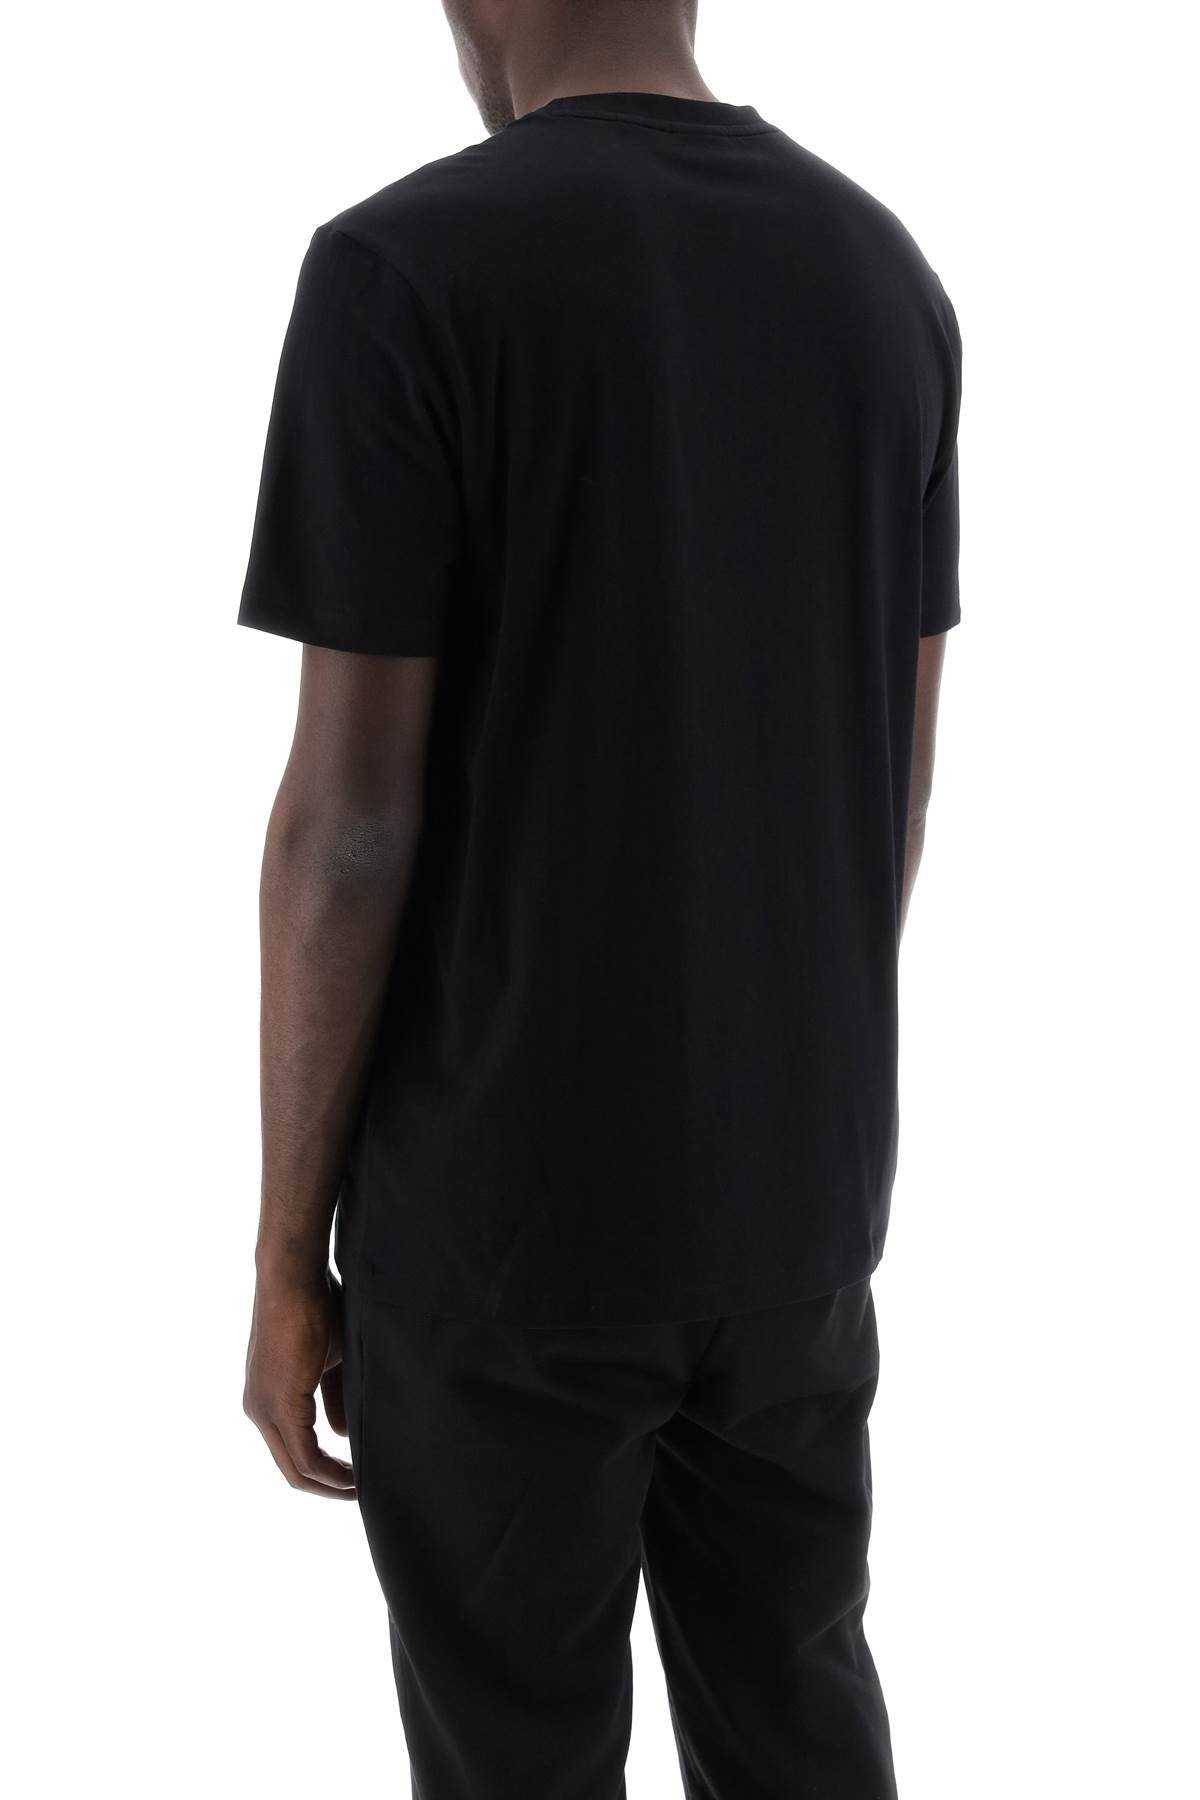 Shop Hugo Dulive T-shirt With Logo Box In Black